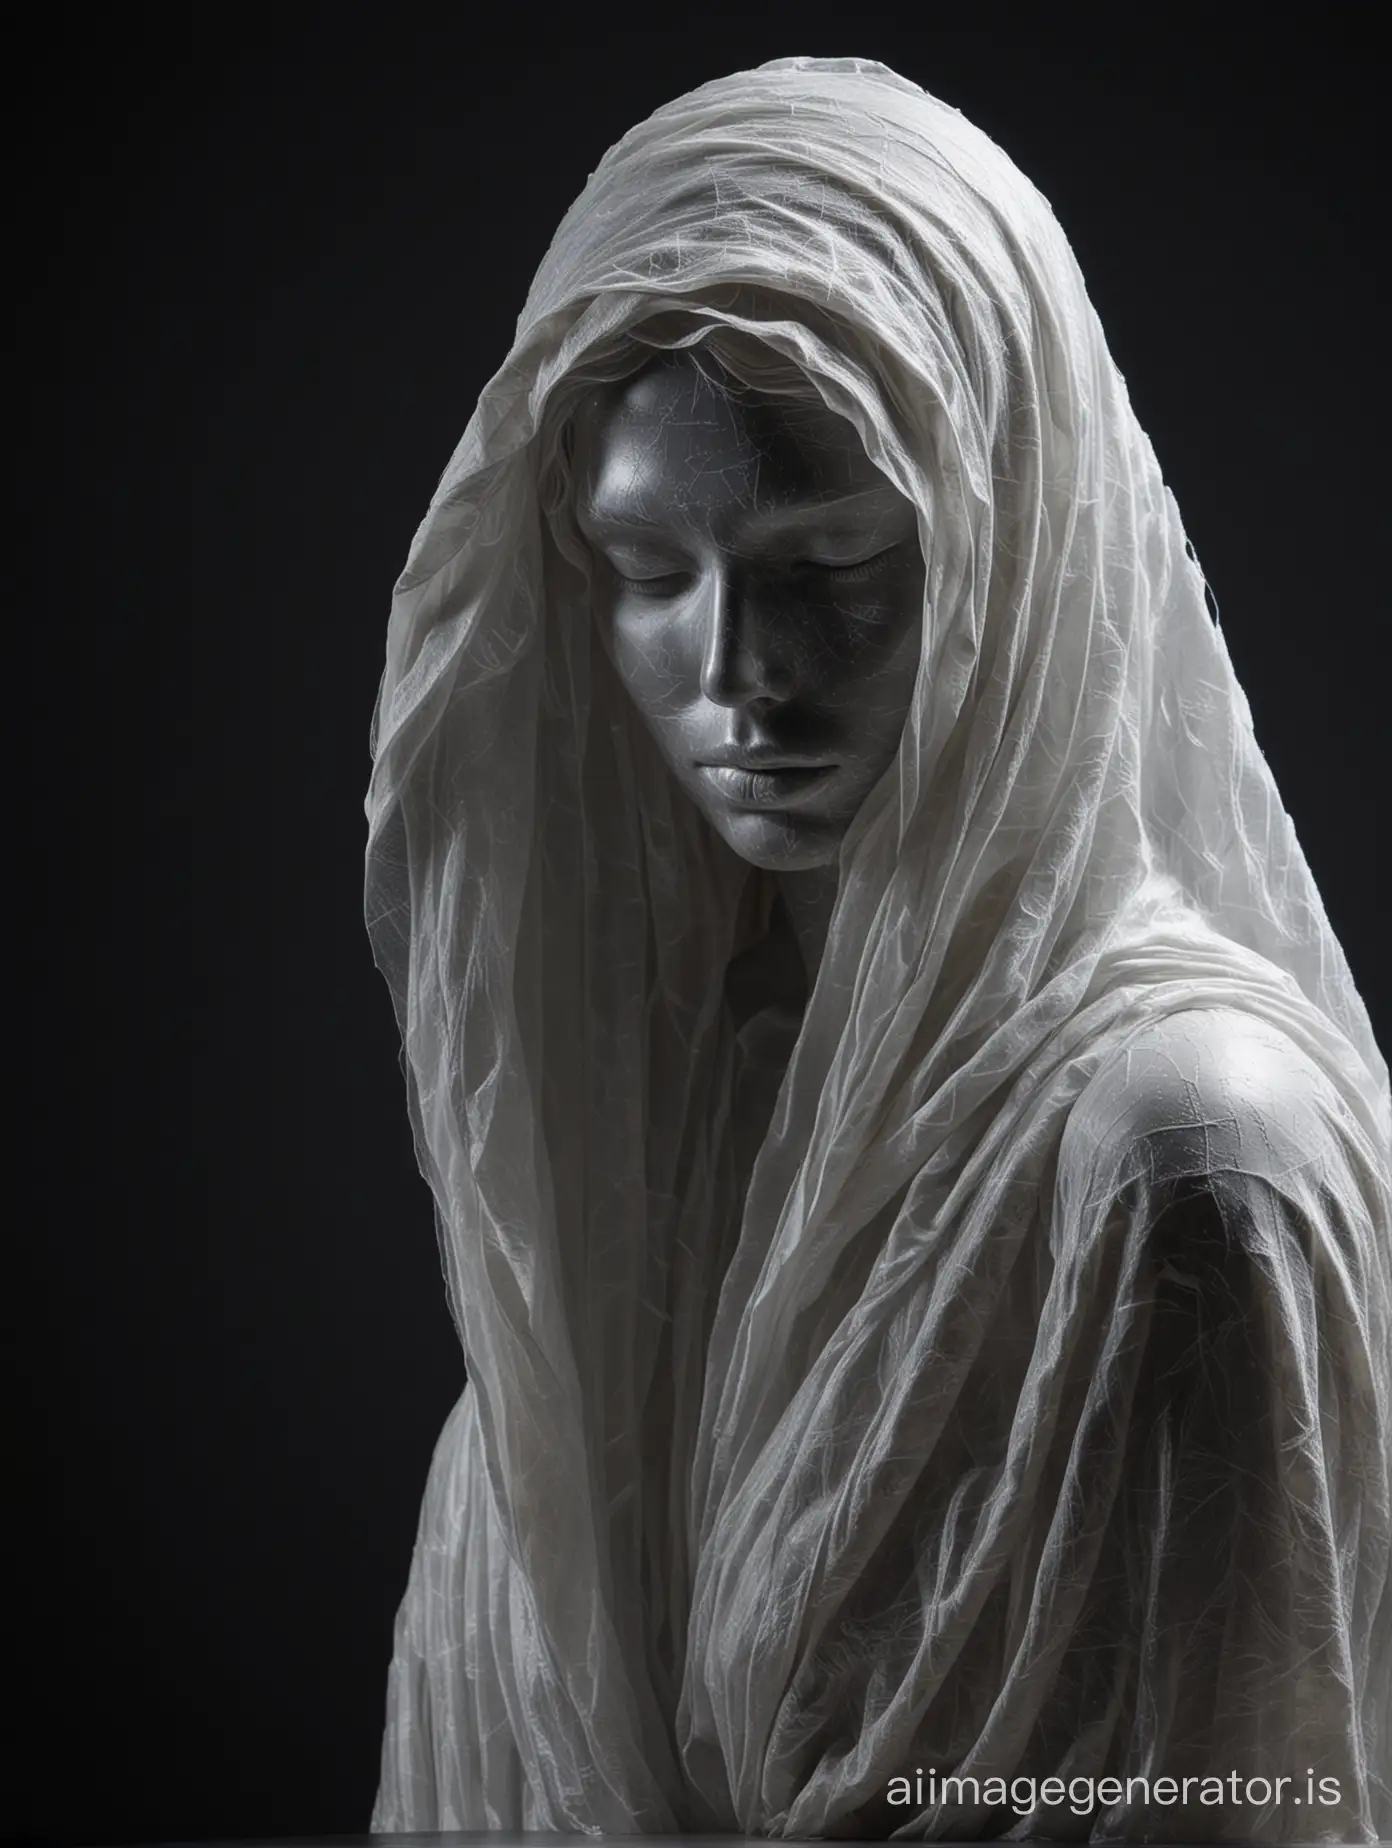 Marble-Woman-Sculpture-Veiled-in-Contemplation-on-Dark-Background